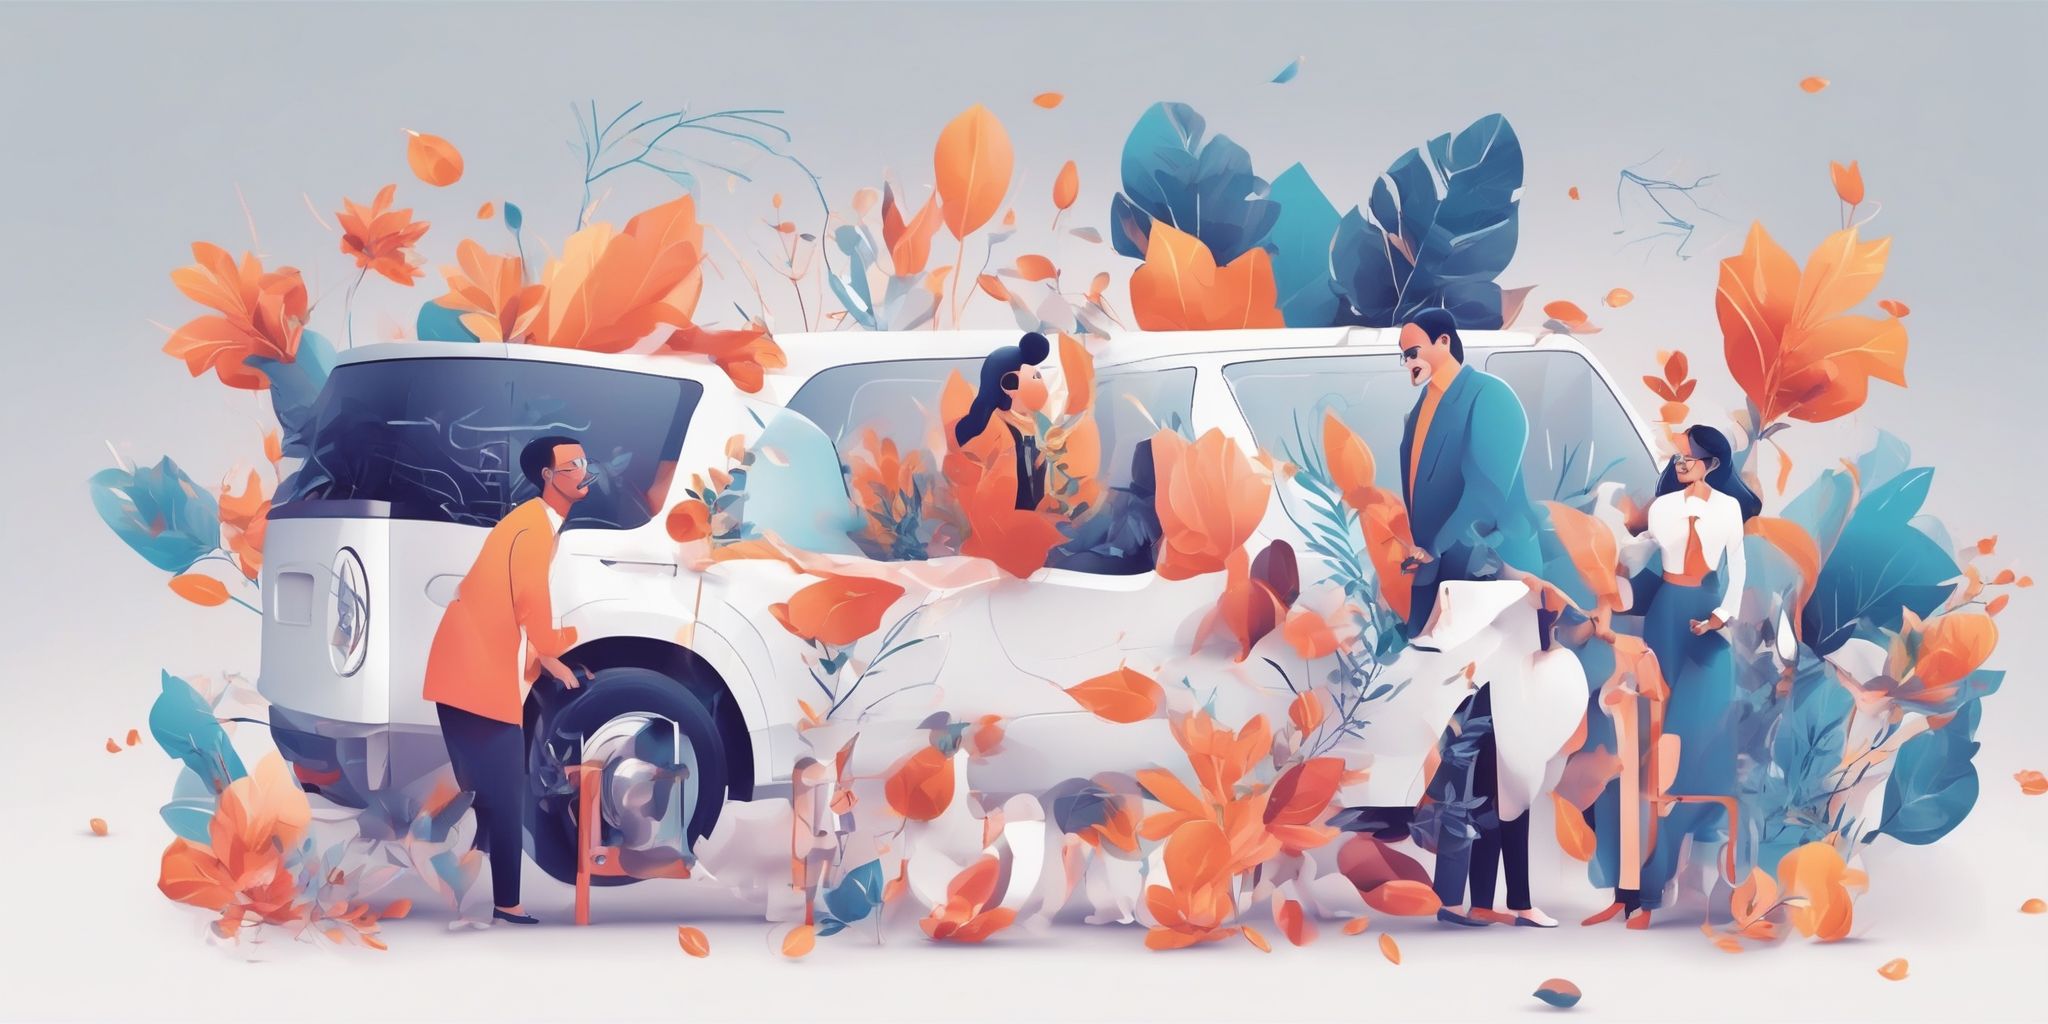 Ad campaign in illustration style with gradients and white background